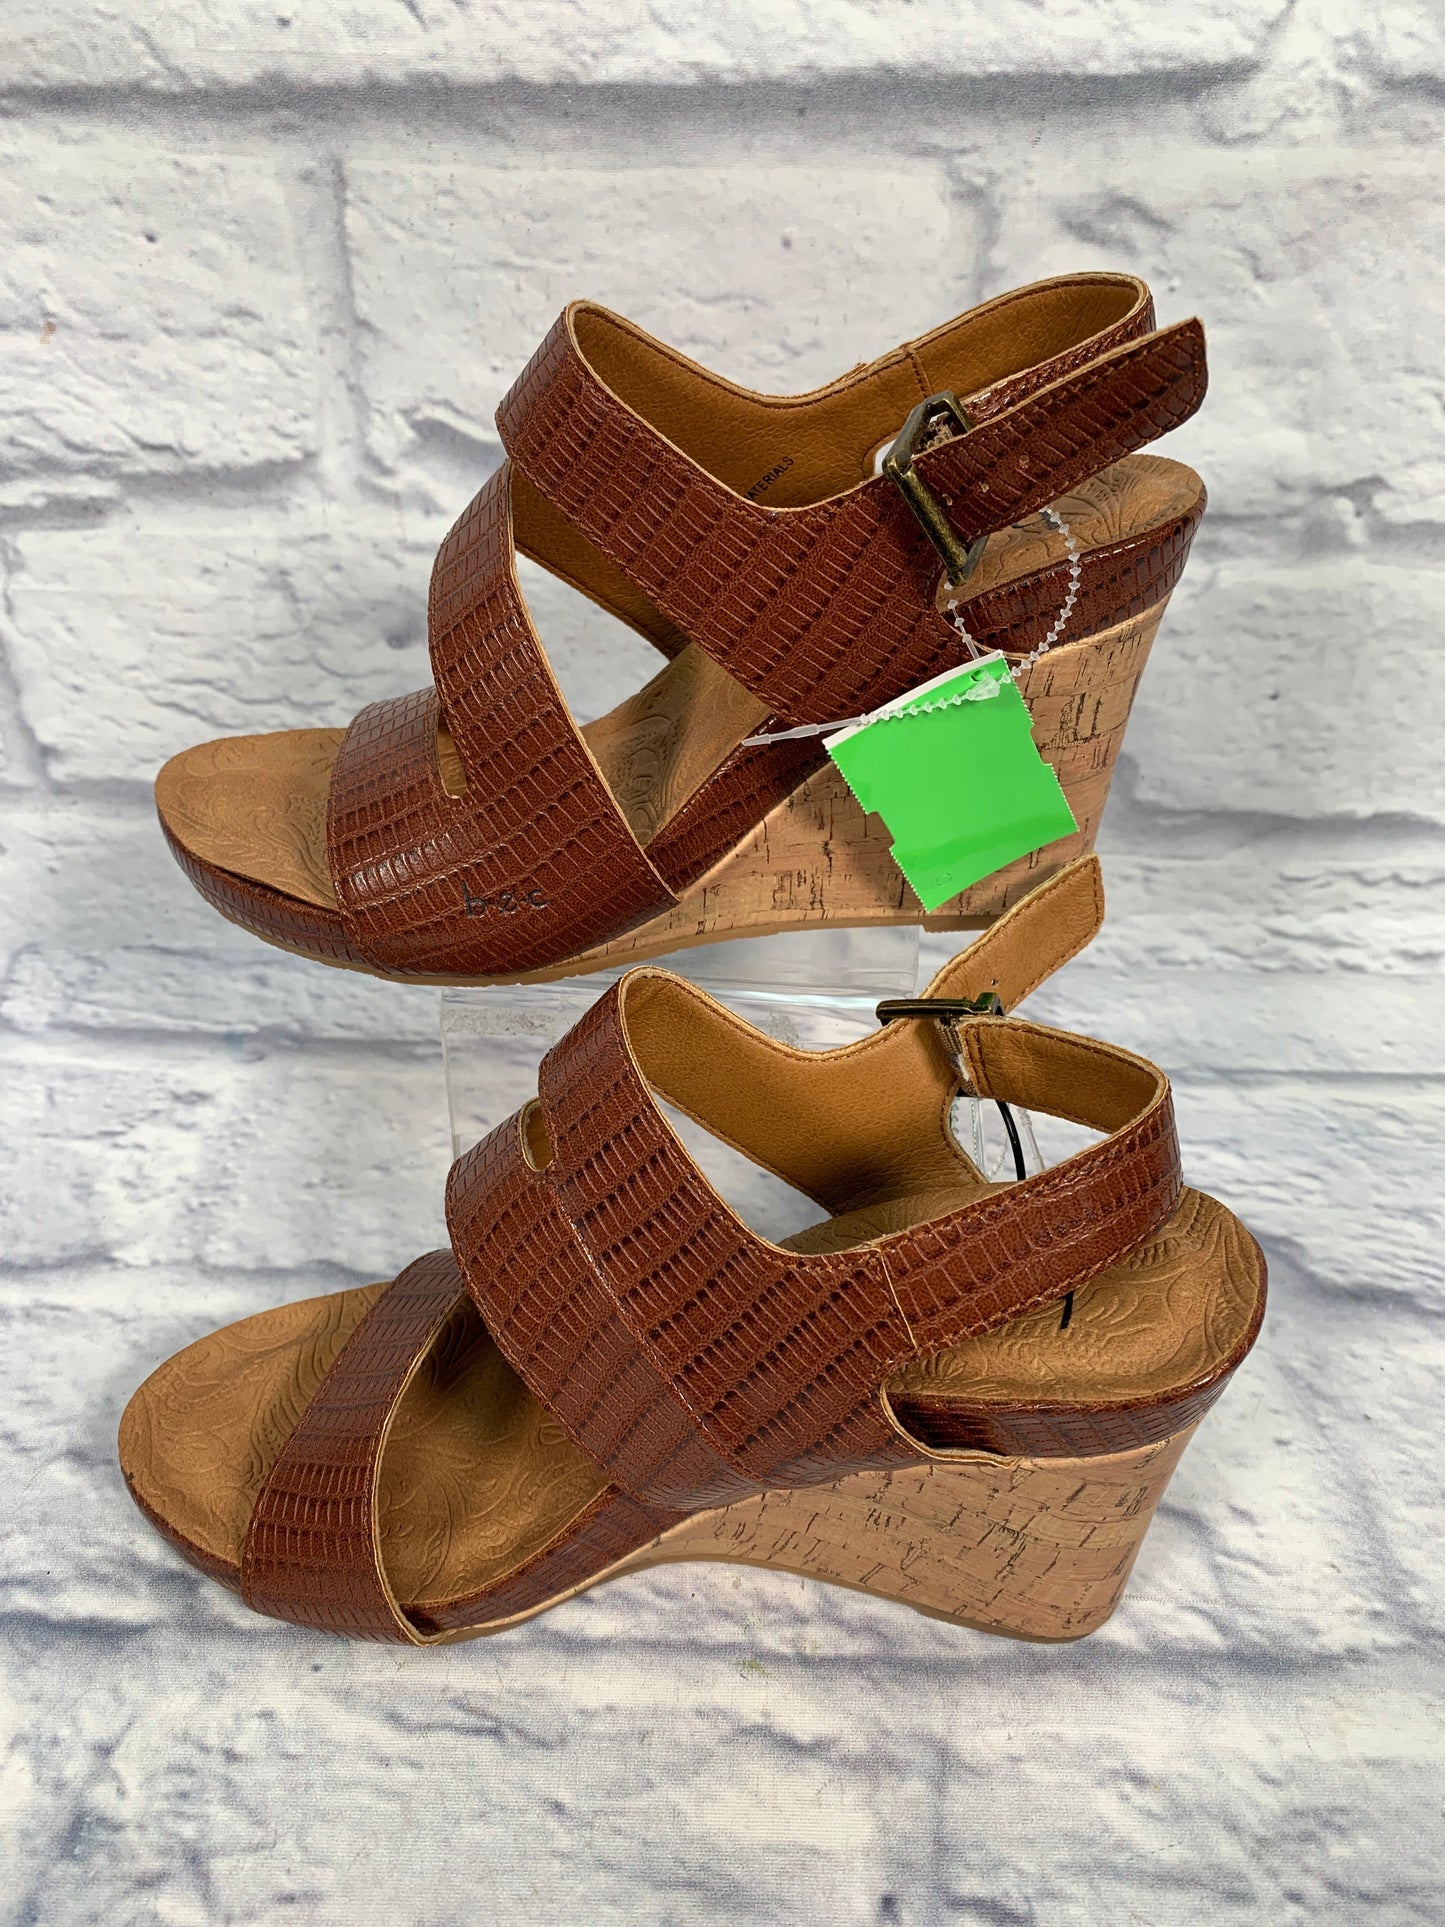 Sandals Heels Wedge By Boc  Size: 7